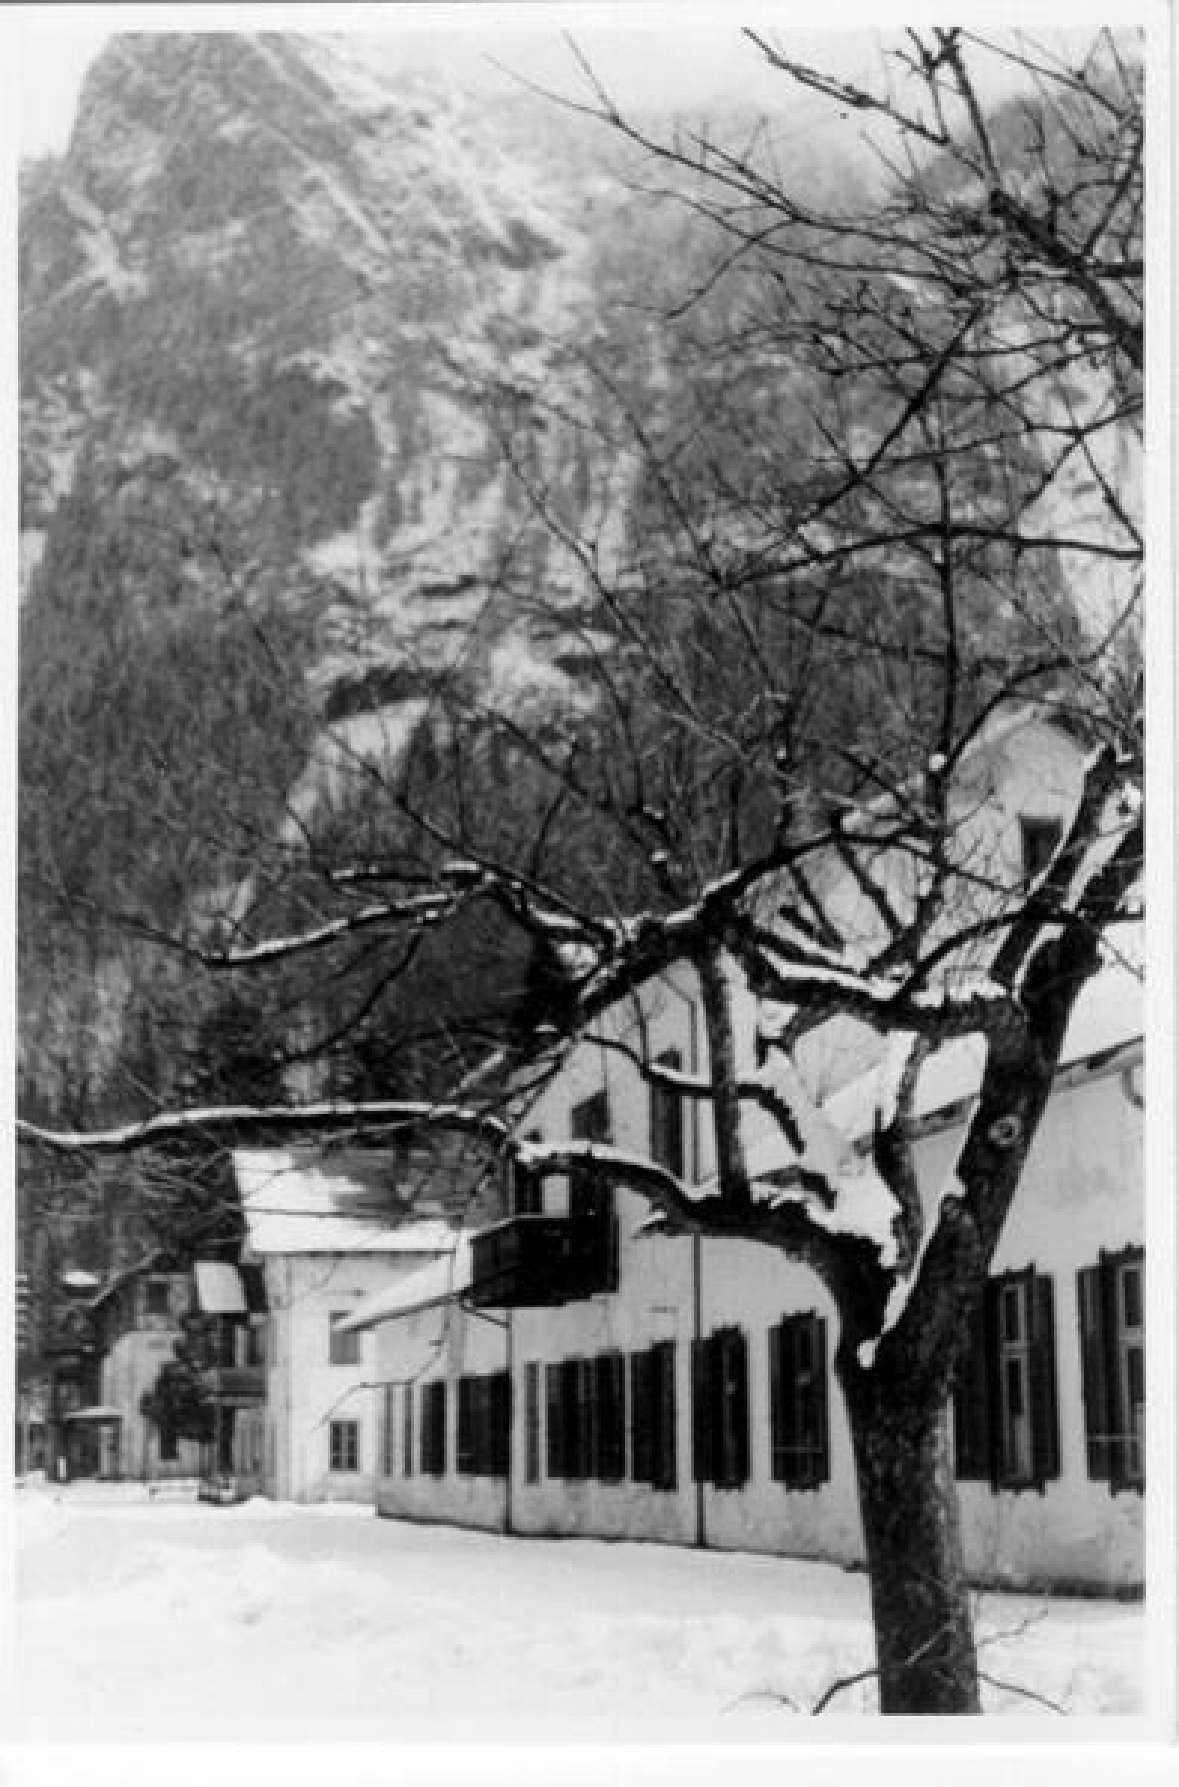 You can see the institute building in Weissenbach am Attersee. On the right of the picture is a tree, behind it a mountain. The photo was taken in winter, there is snow everywhere.